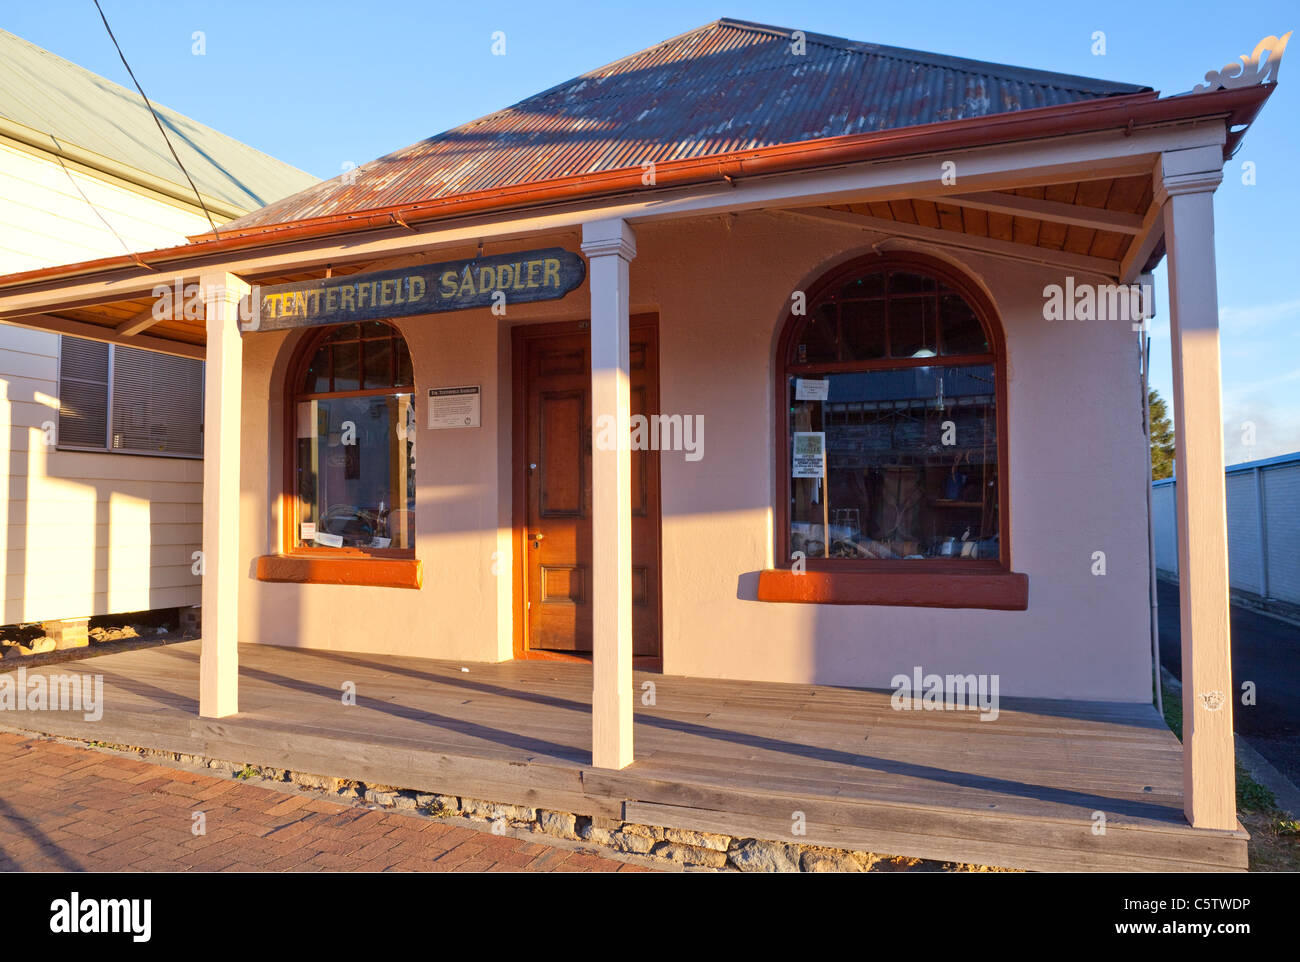 Tenterfield Saddler, Tenterfield, New South Wales, Australie Banque D'Images